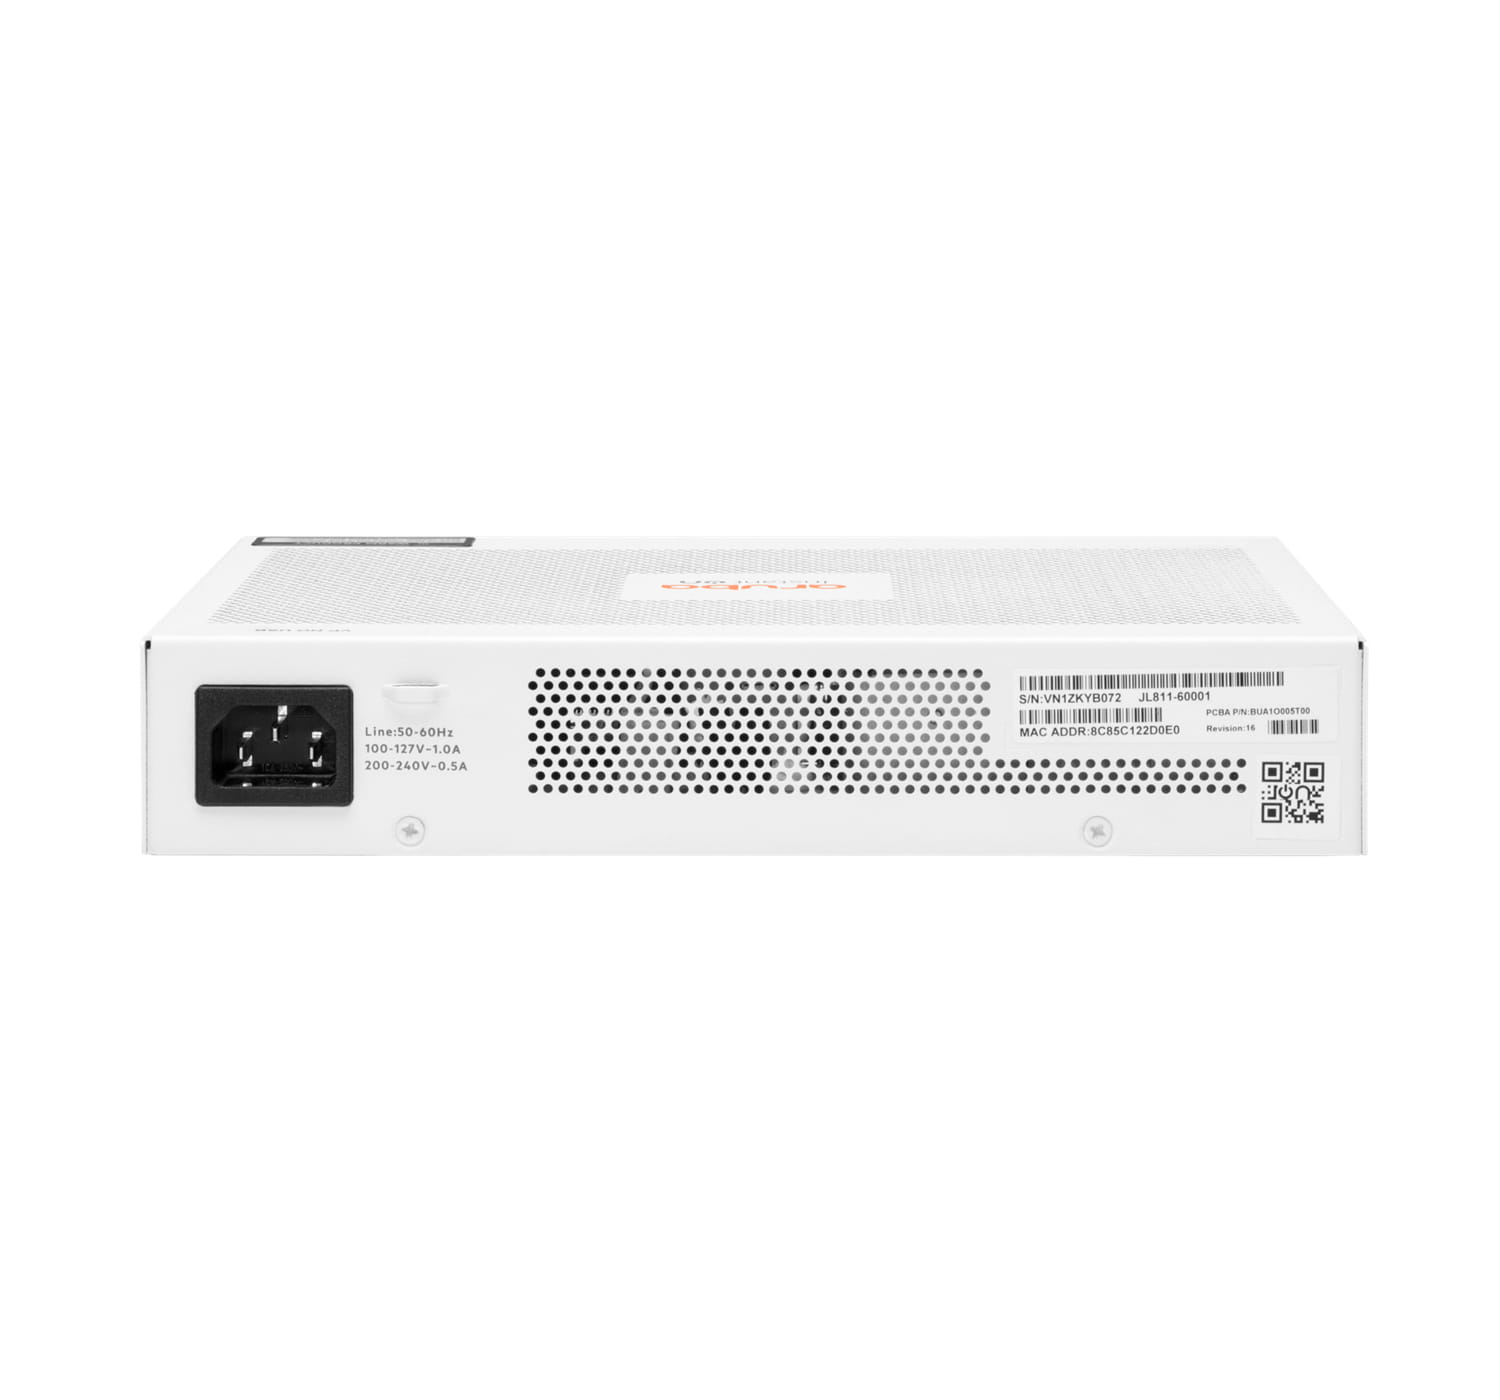 HPE Networking Instant On 1830 8G 4p Class4 PoE 65W Switch - Switch - Smart - 4 x 10/100/1000 + 4 x 10/100/1000 (PoE+) - managed